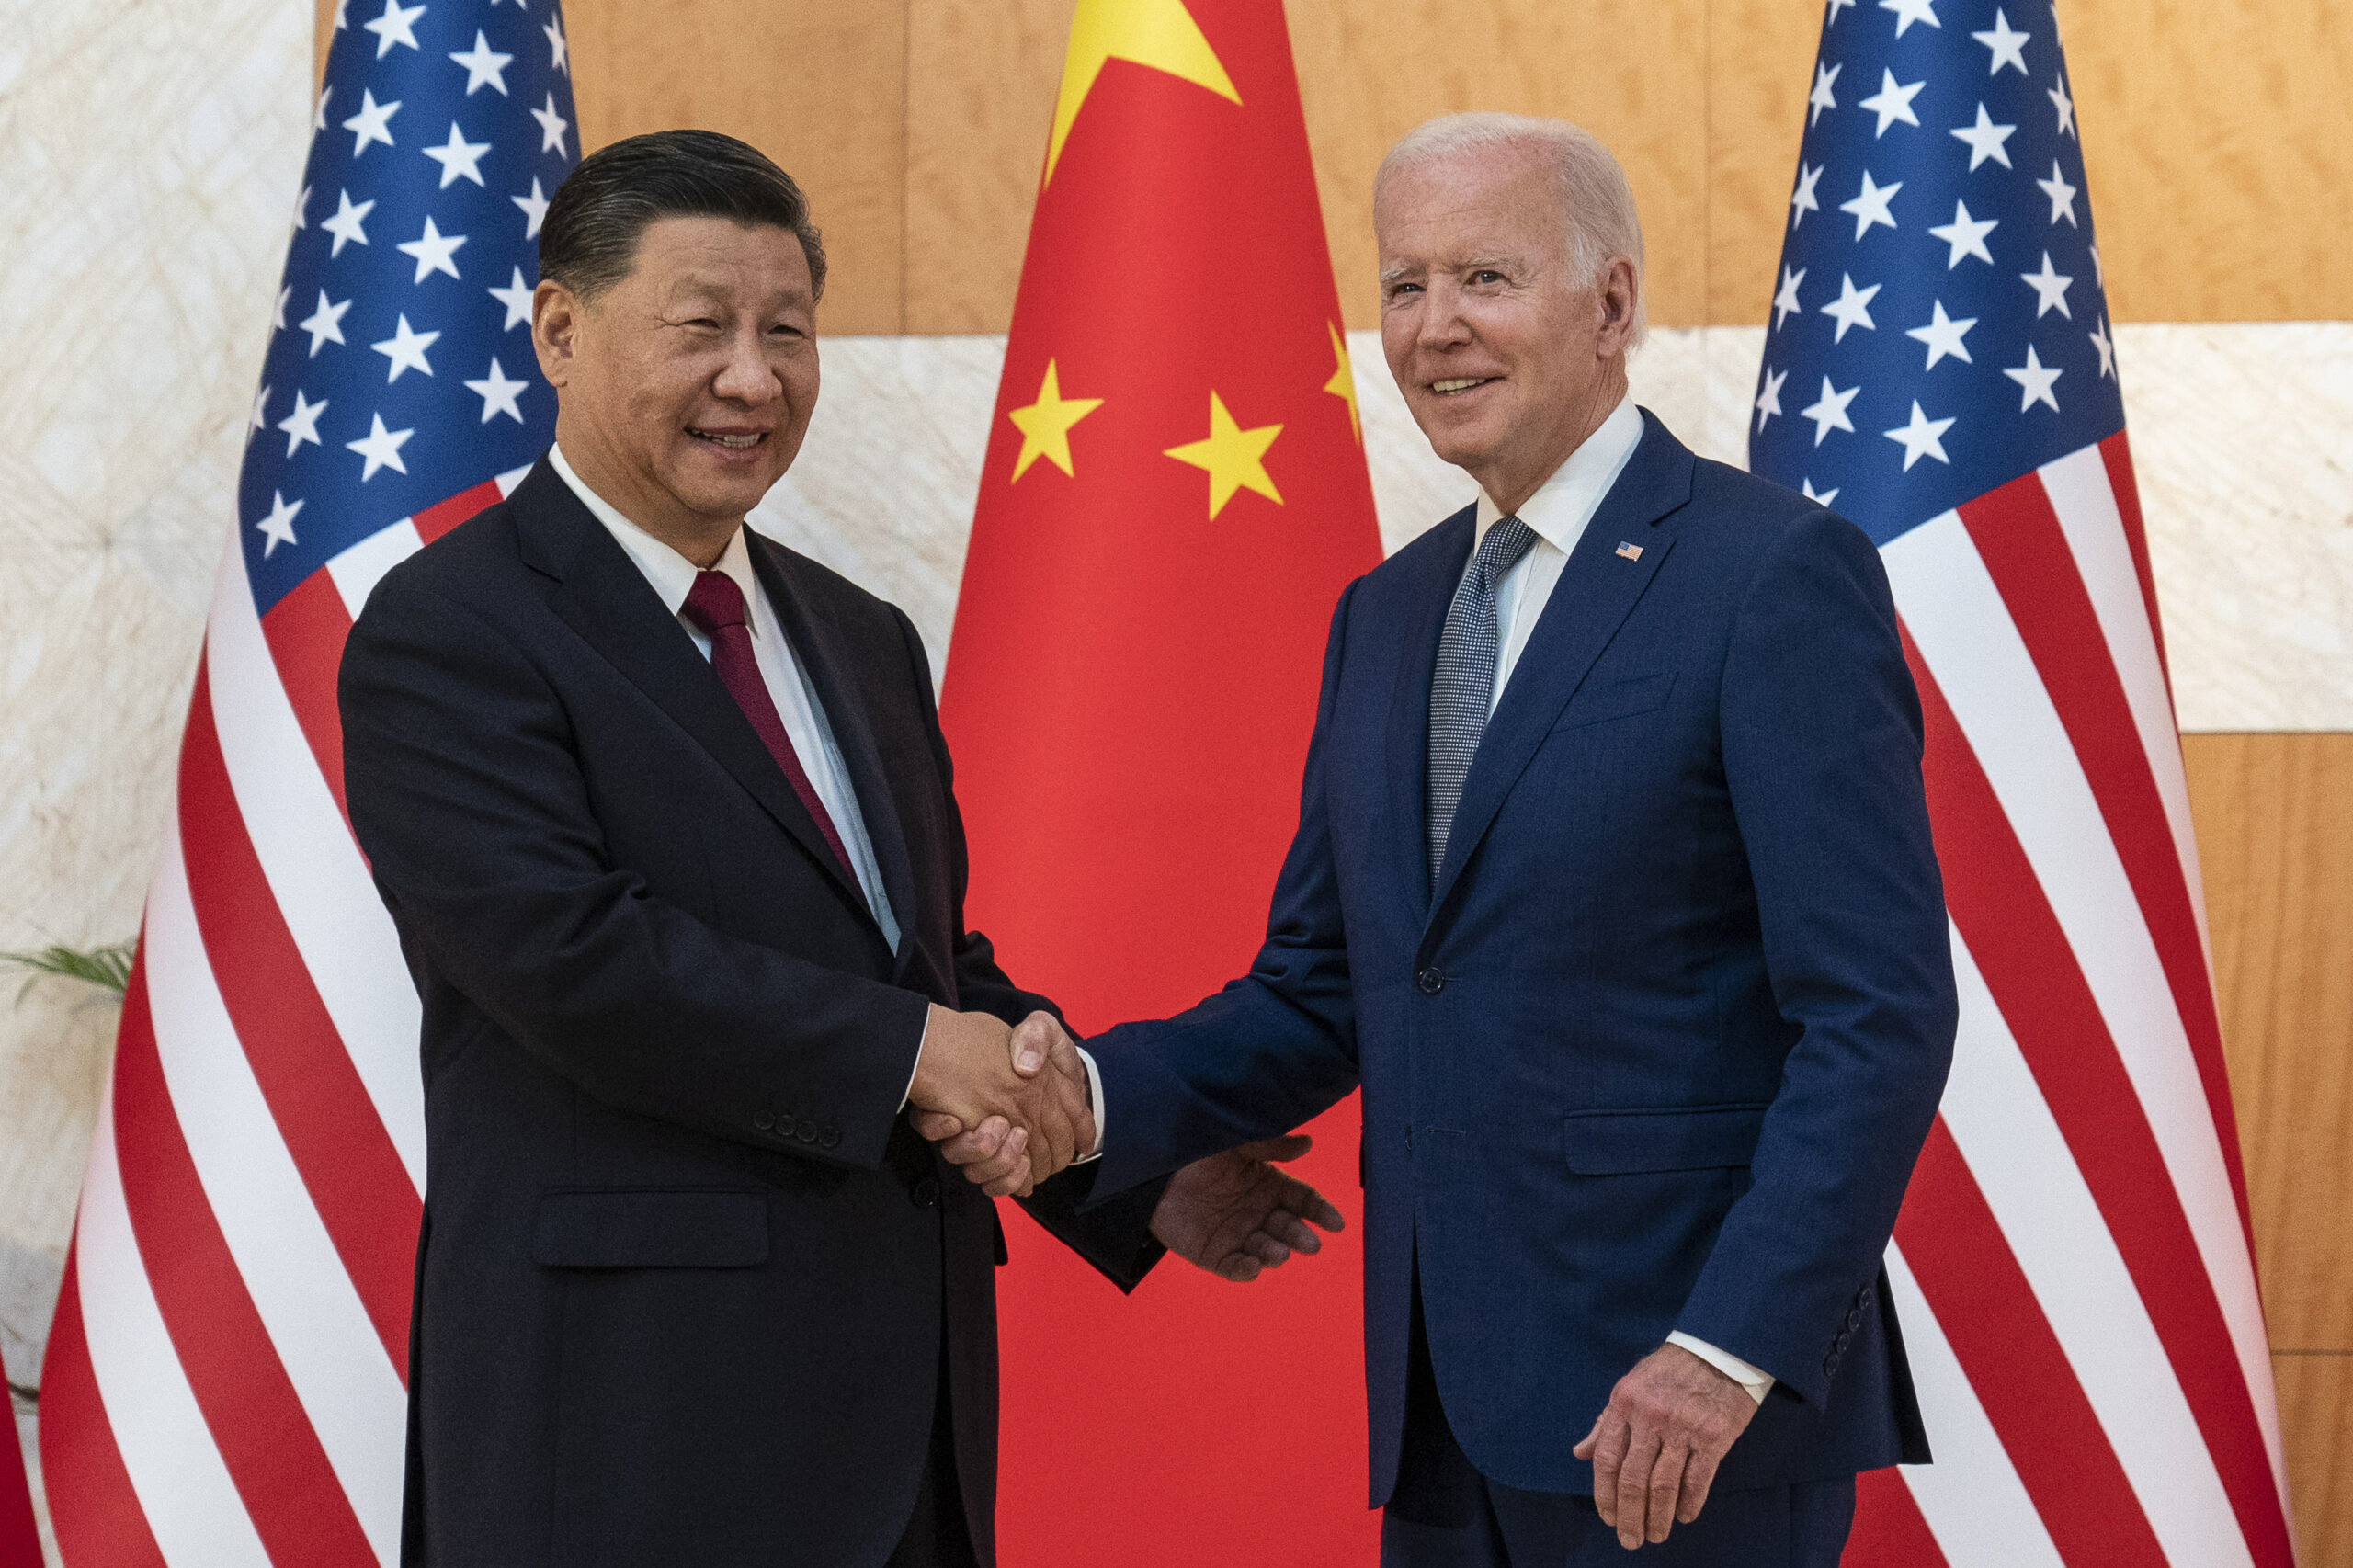 Diplomacy is not ‘an act of weakness’ — decoding Biden’s China outreach